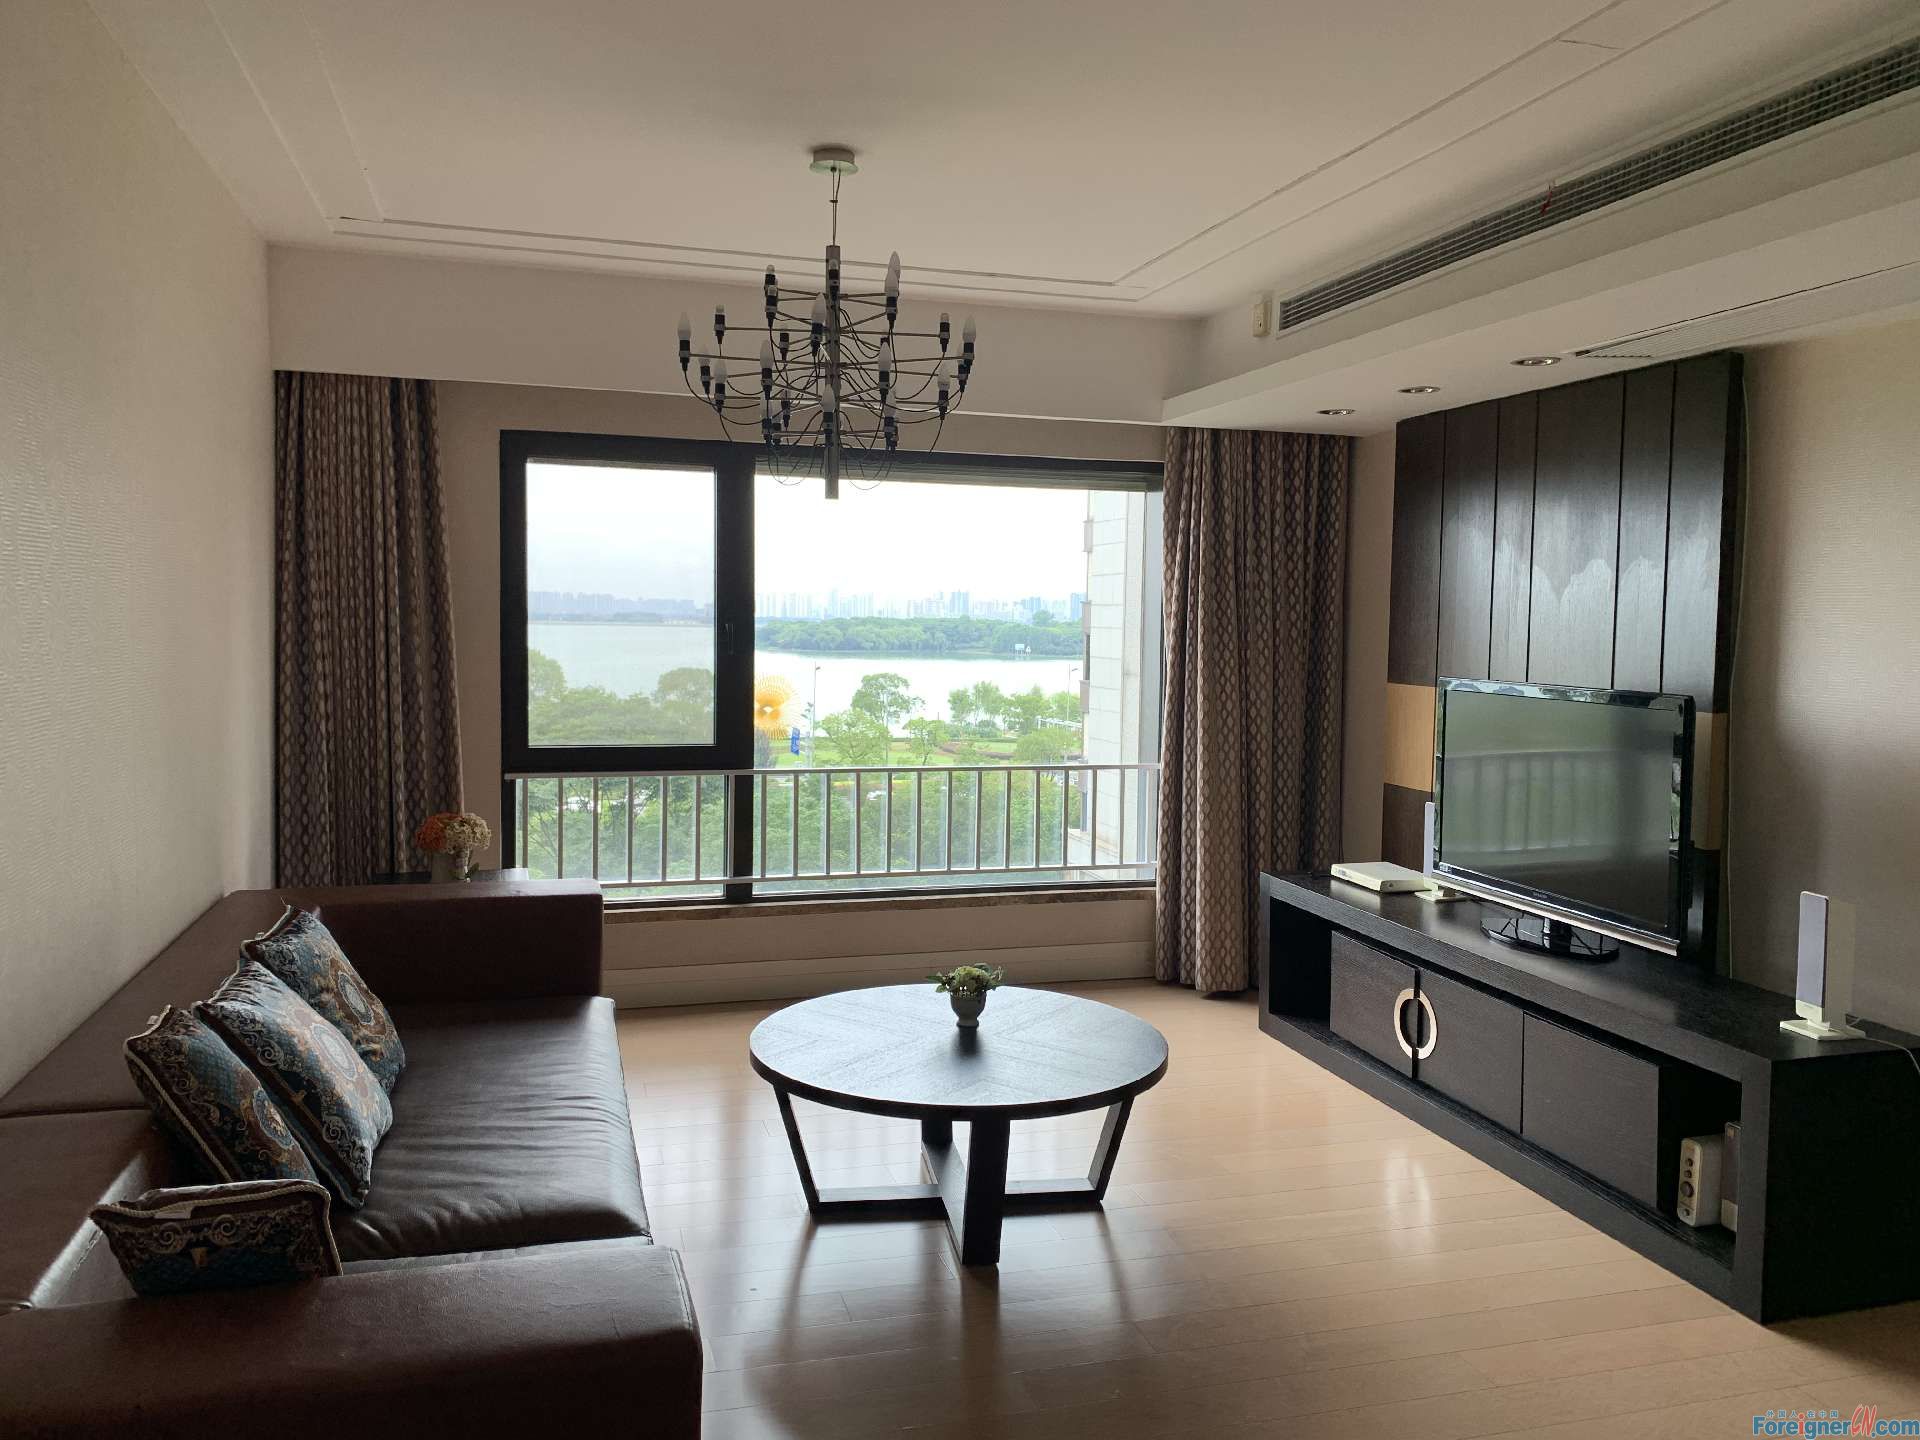 Amazing !! great apartment rent in Suzhou /1 bedroom and 1 bathroom/cozy room and modern design/amazing lake view /Jinji lake/Moon Habor/